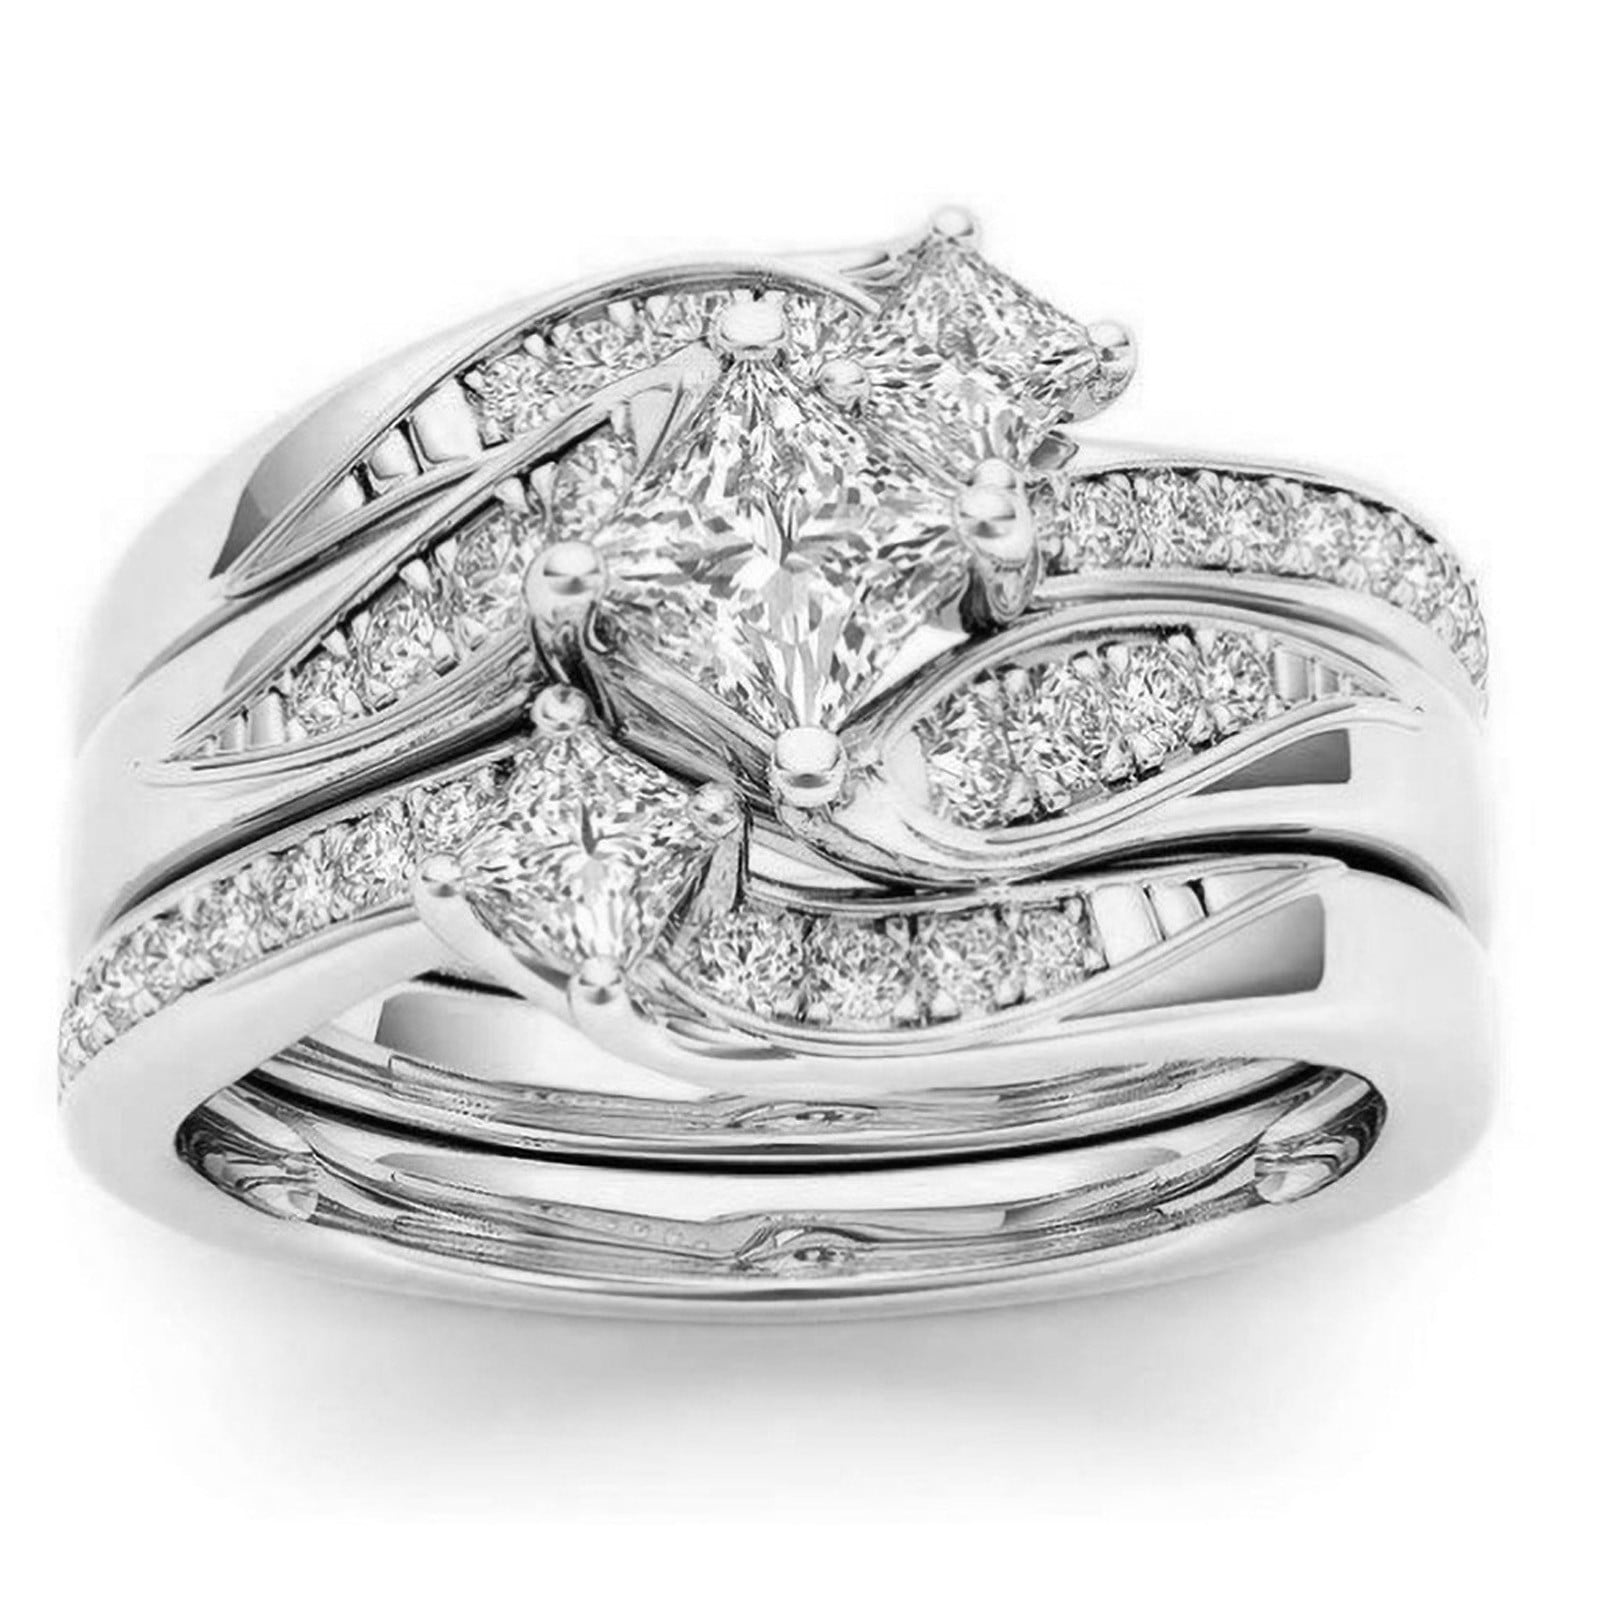 2Pcs Valentine Wedding Rings Set for Him and Her Cheap Rings Heart Shape  Women Engagement Ring - Walmart.com